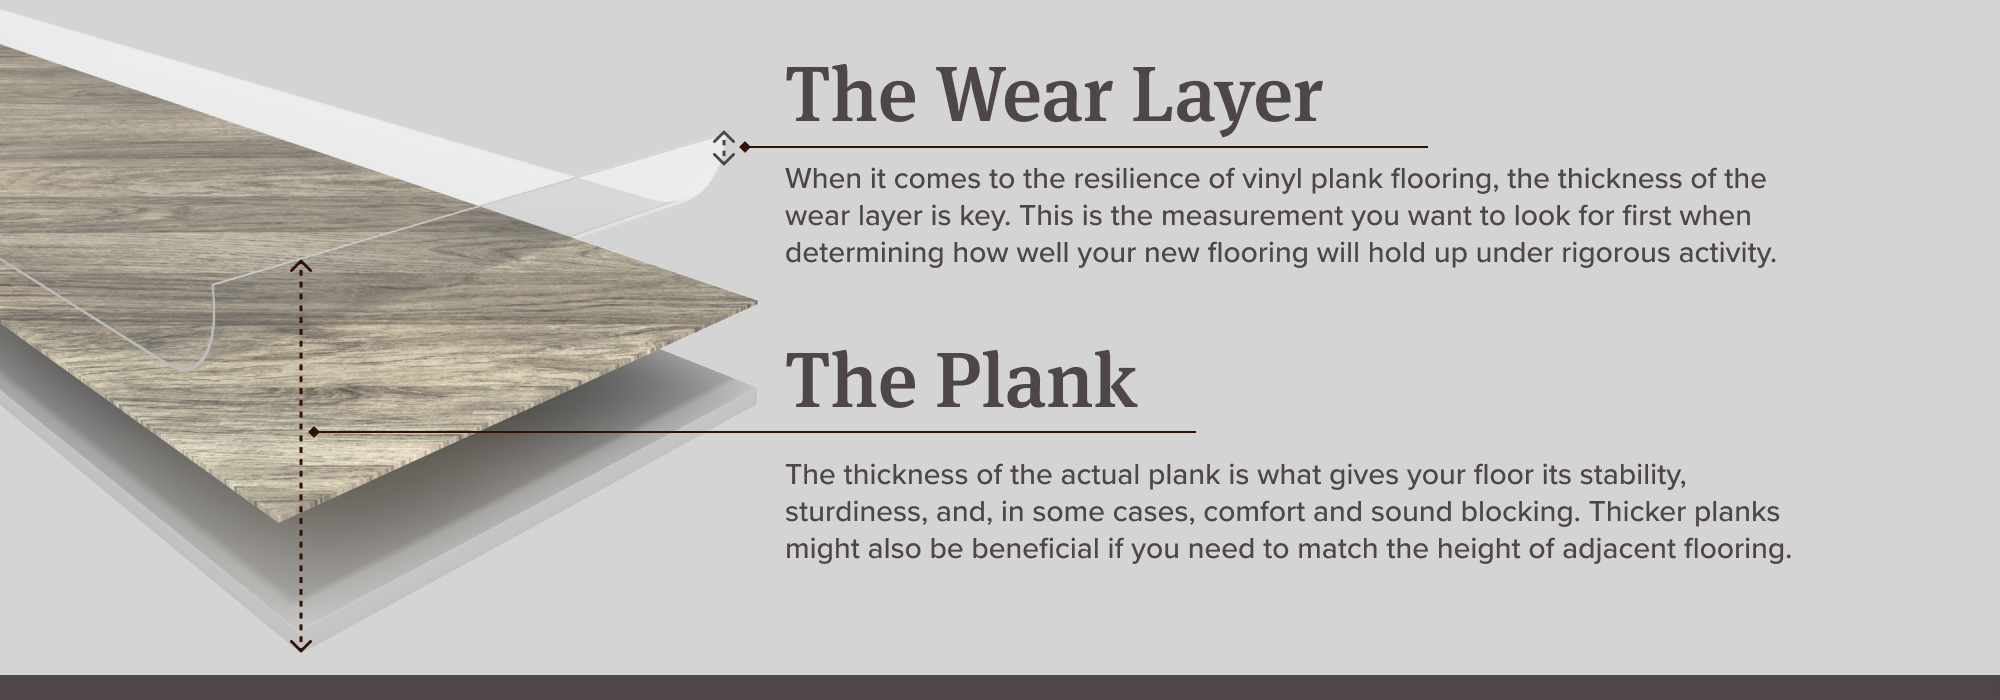 graphic showing both top wear layer and total plank thickness of vinyl plank